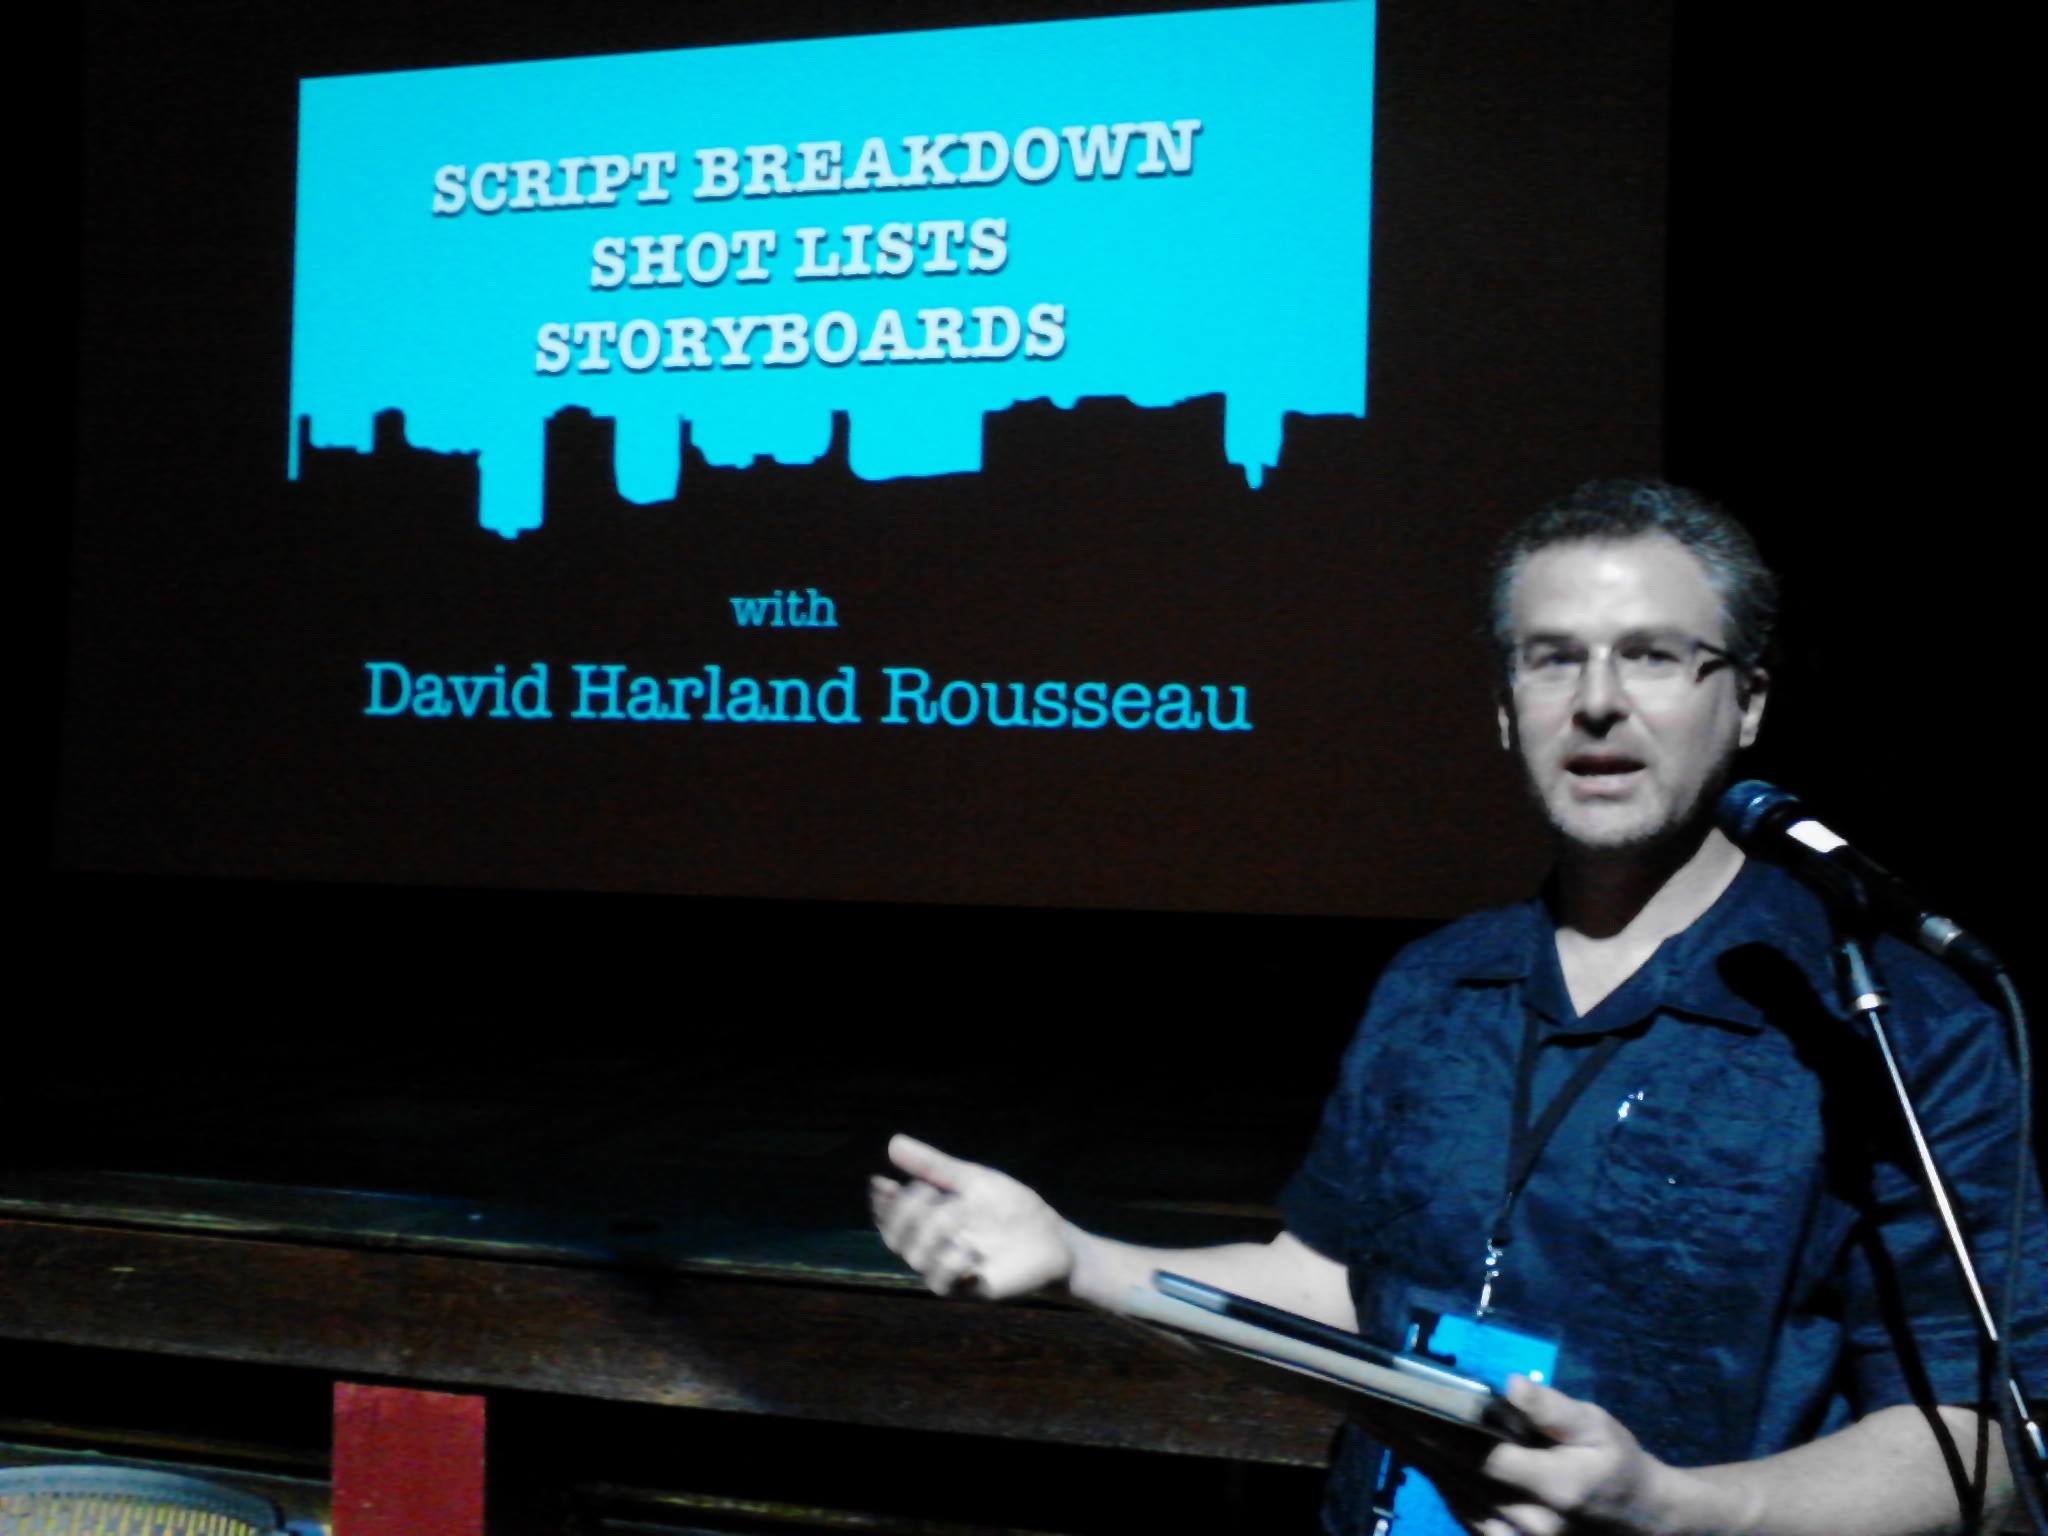 Presenting a workshop on storyboarding at the Knoxville Film and Music Festival. http://www.knoxvillefilms.com/